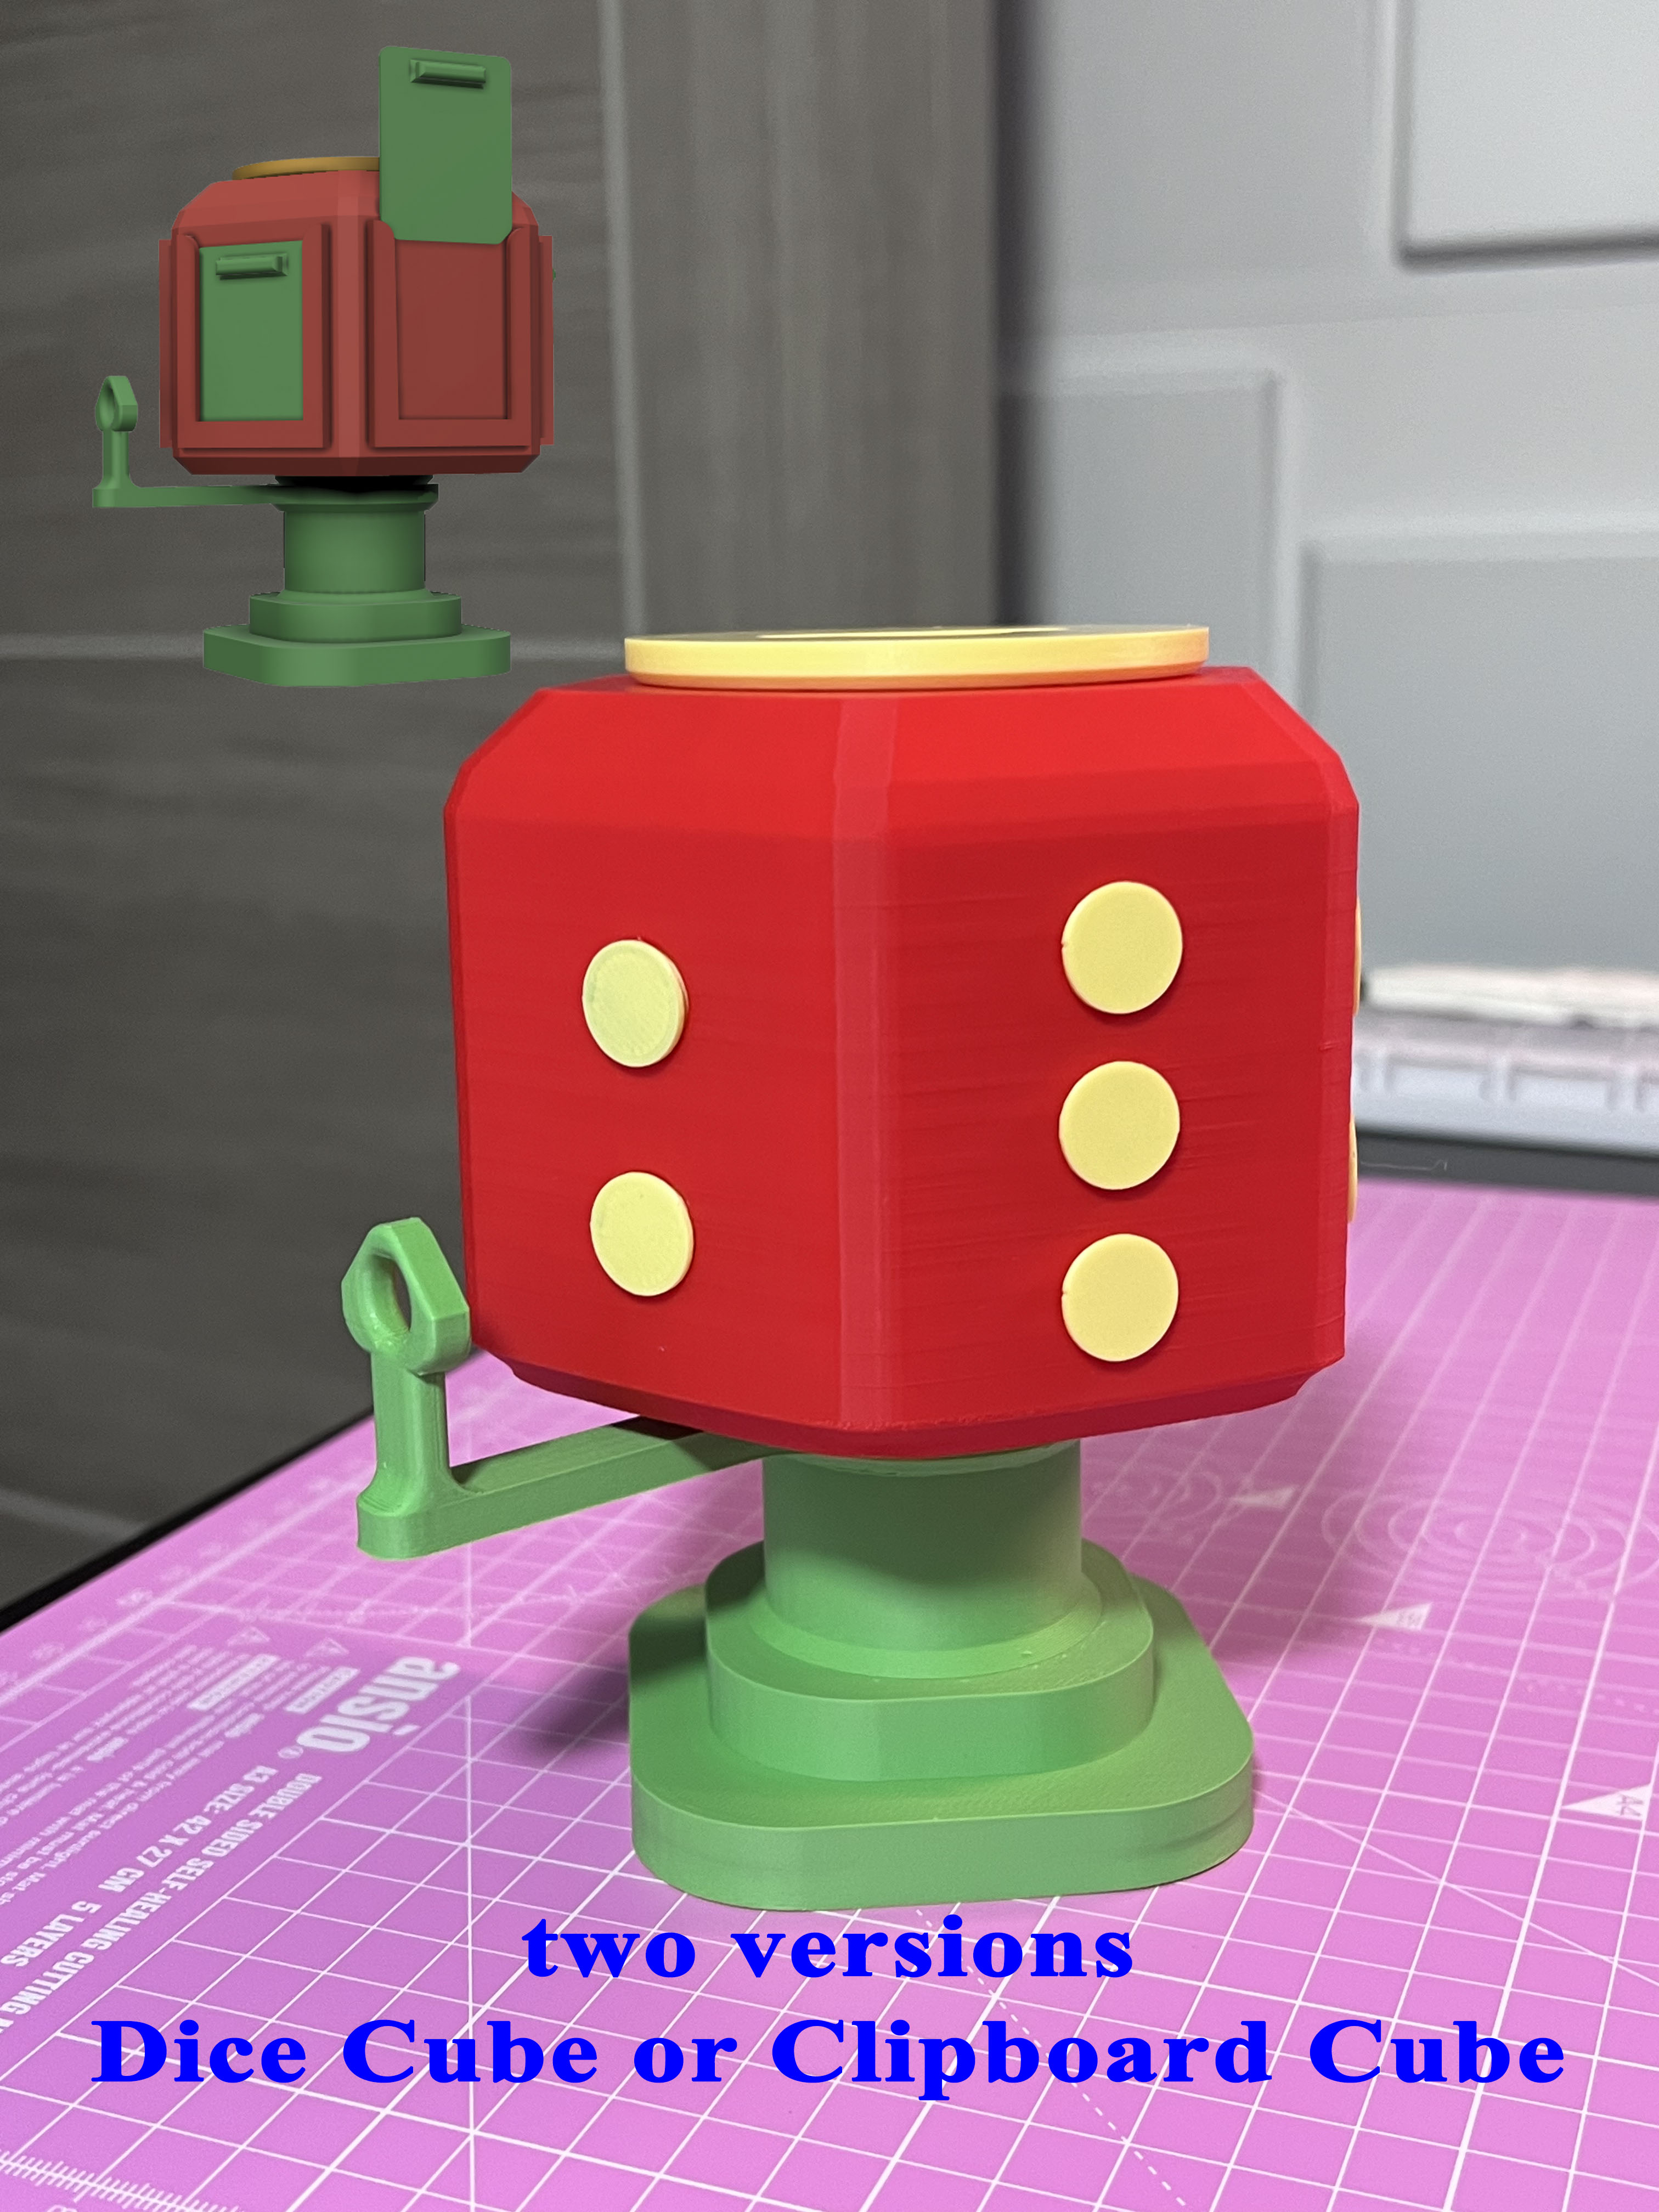 The Working Dice Piggy Bank by Peter Martin | Download free STL